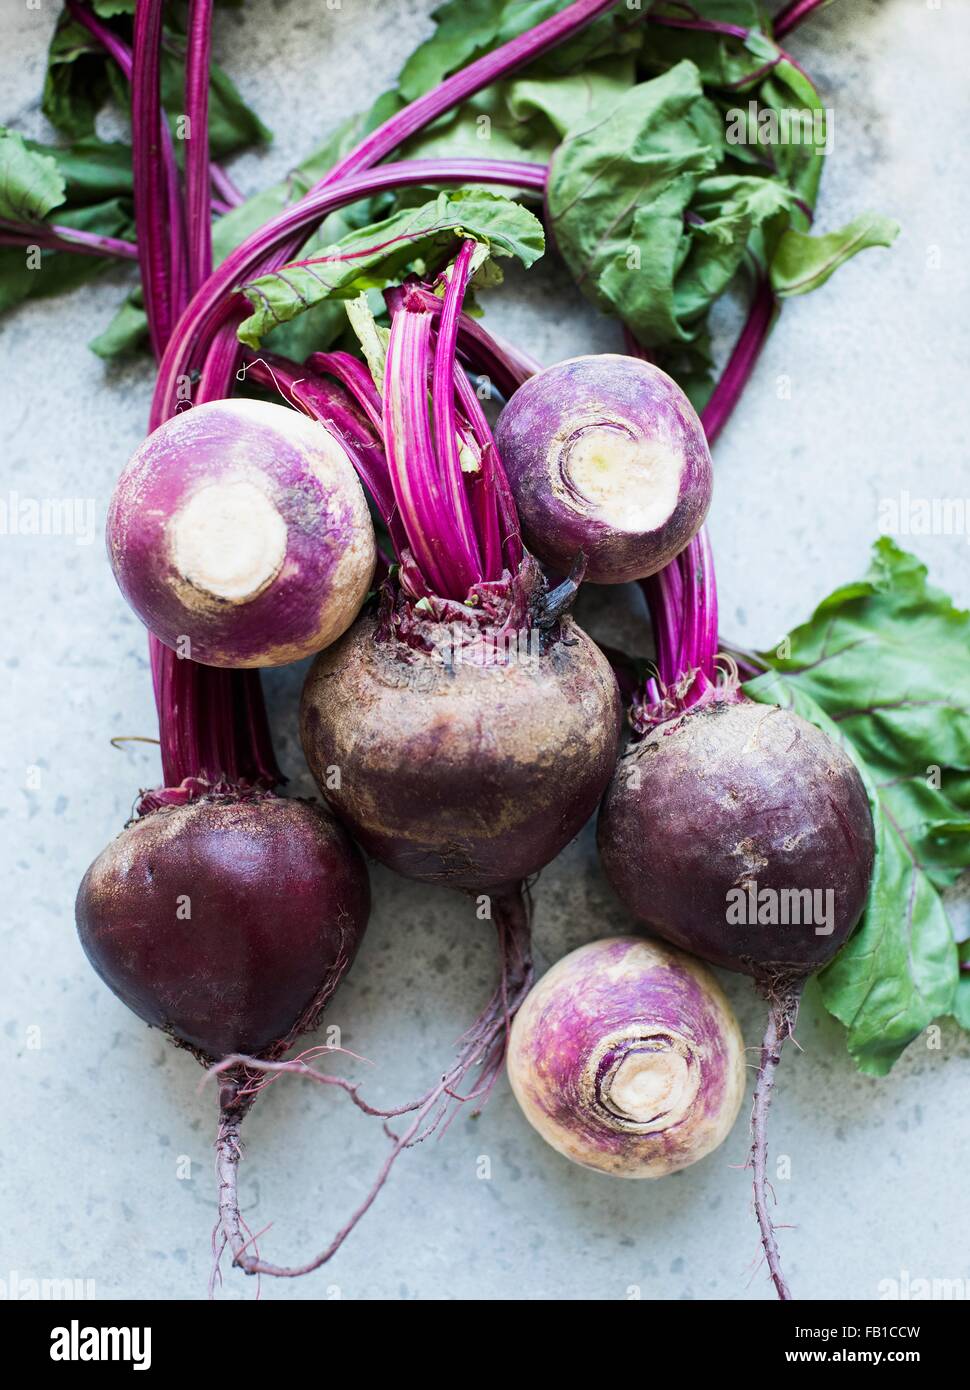 Overhead view of bunch of beetroots and turnips Stock Photo